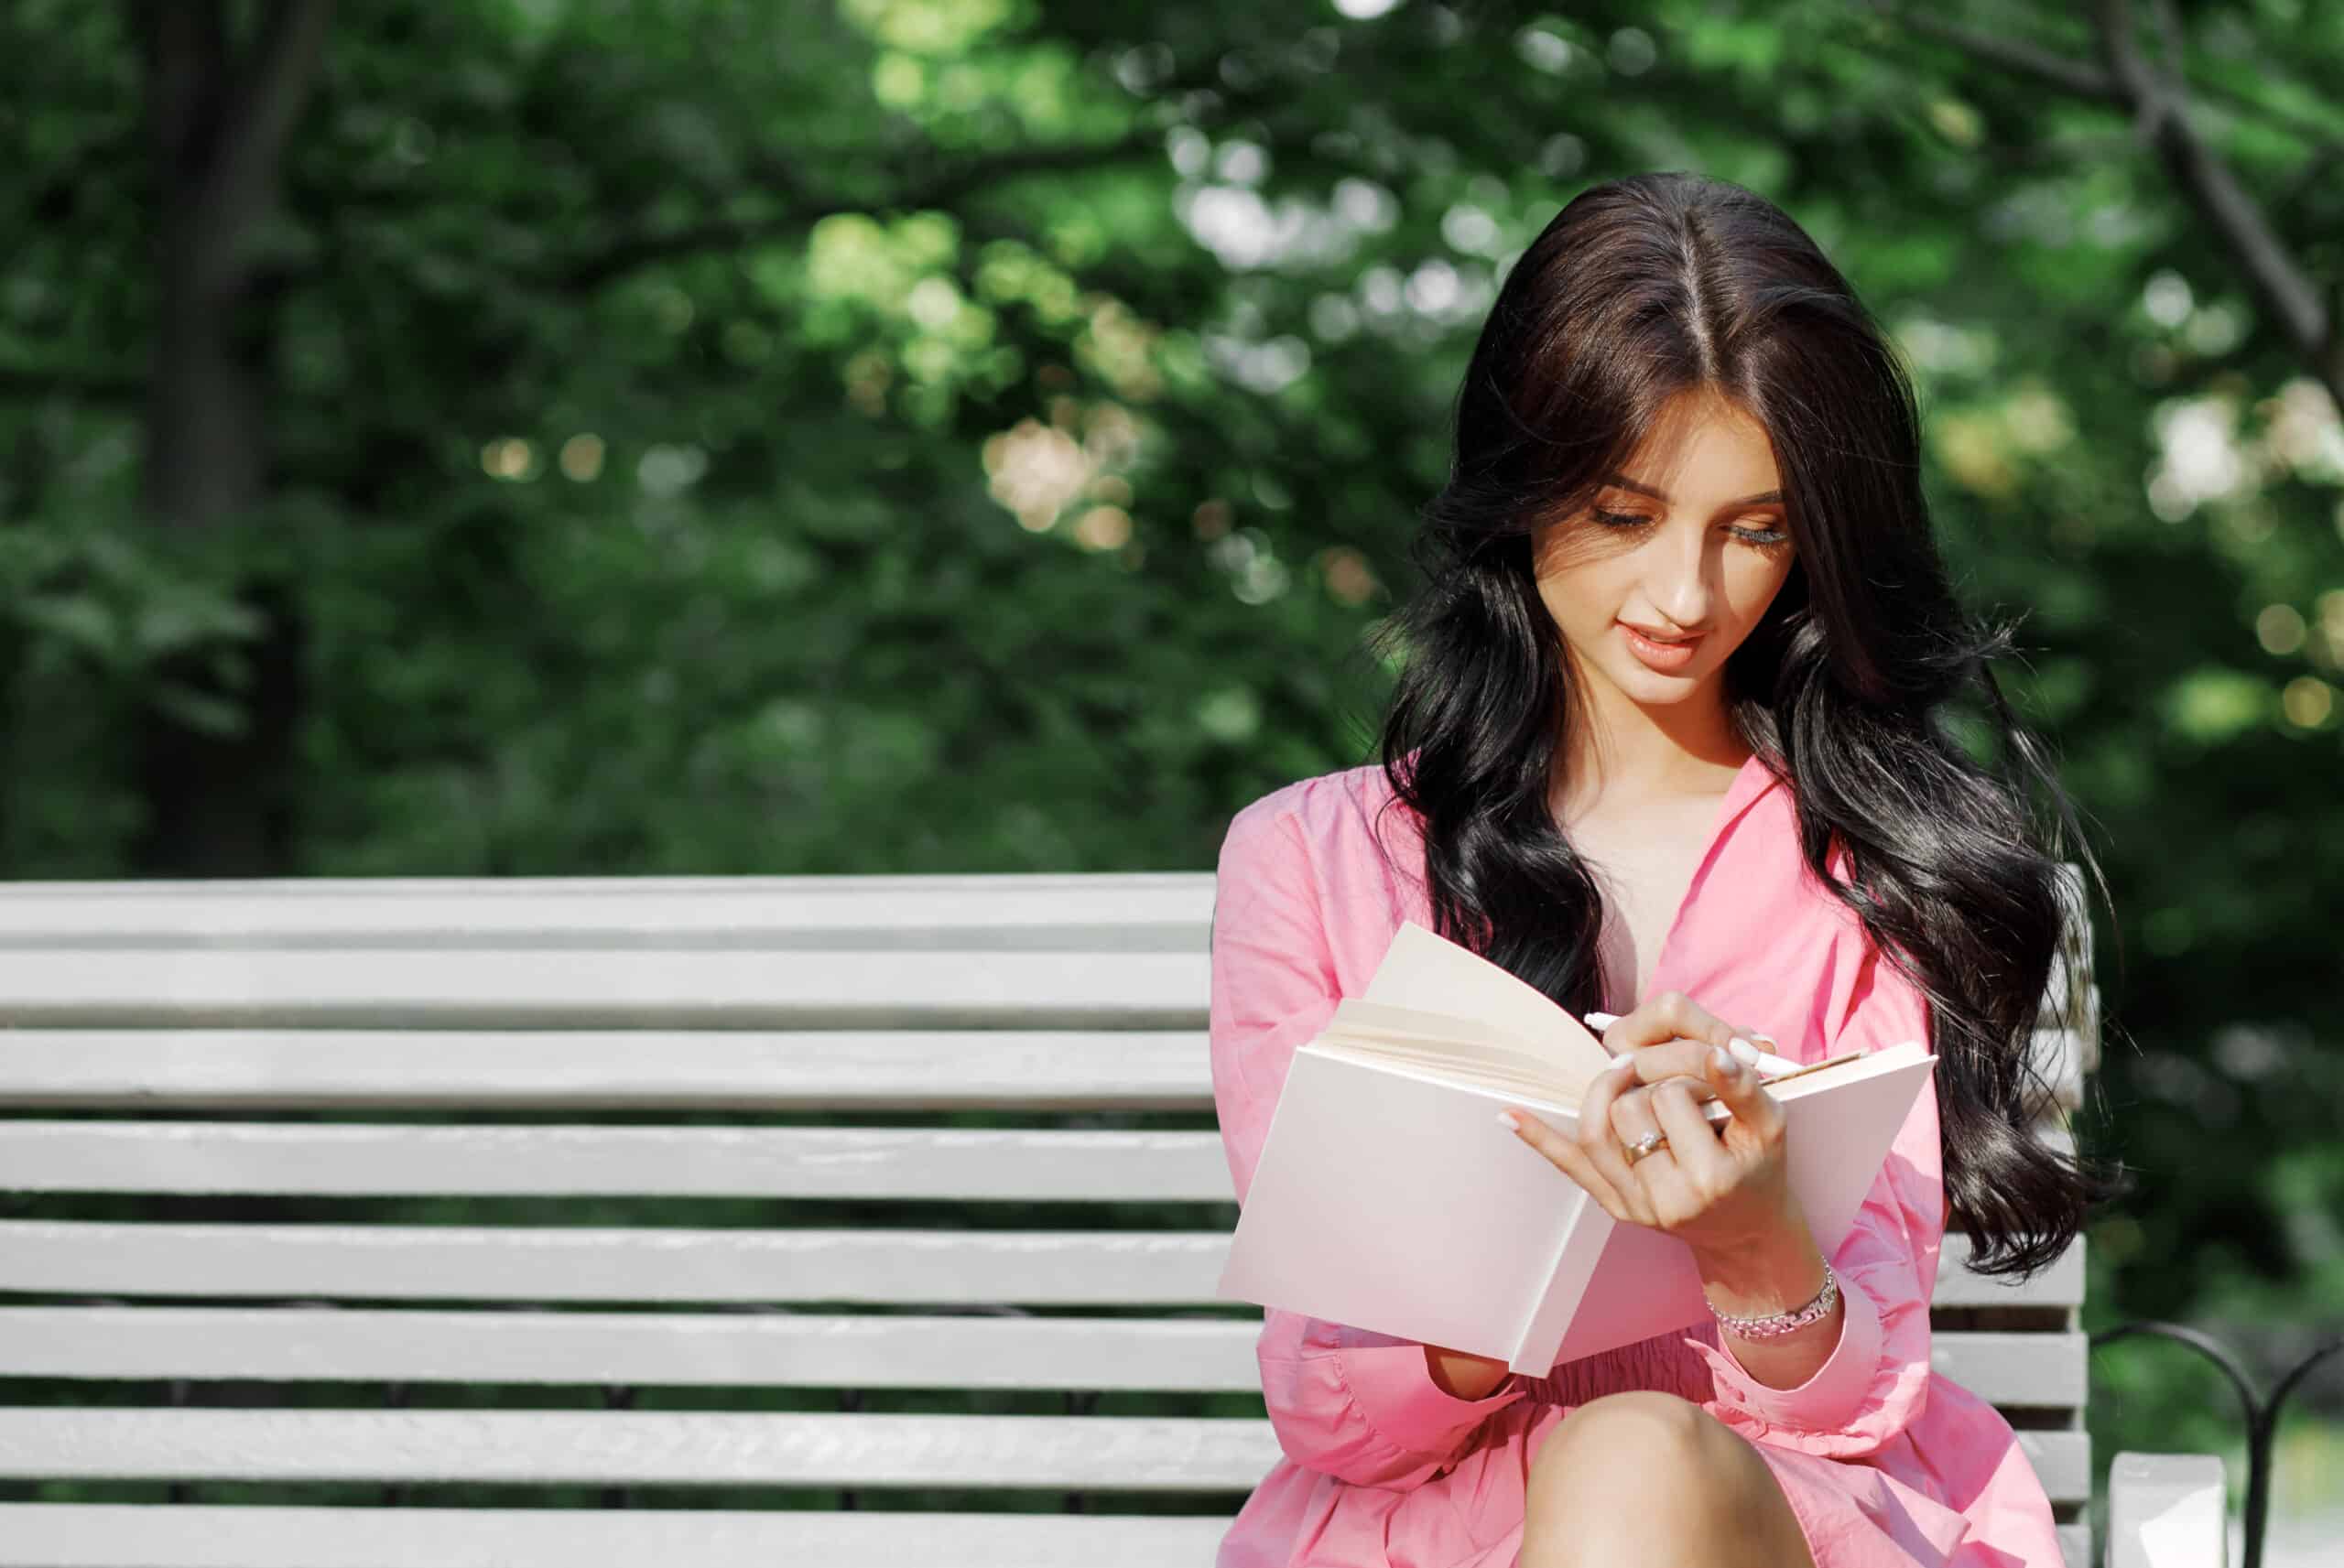 Beautiful young woman in pink dress, writing in notebook sitting on bench outdoor.